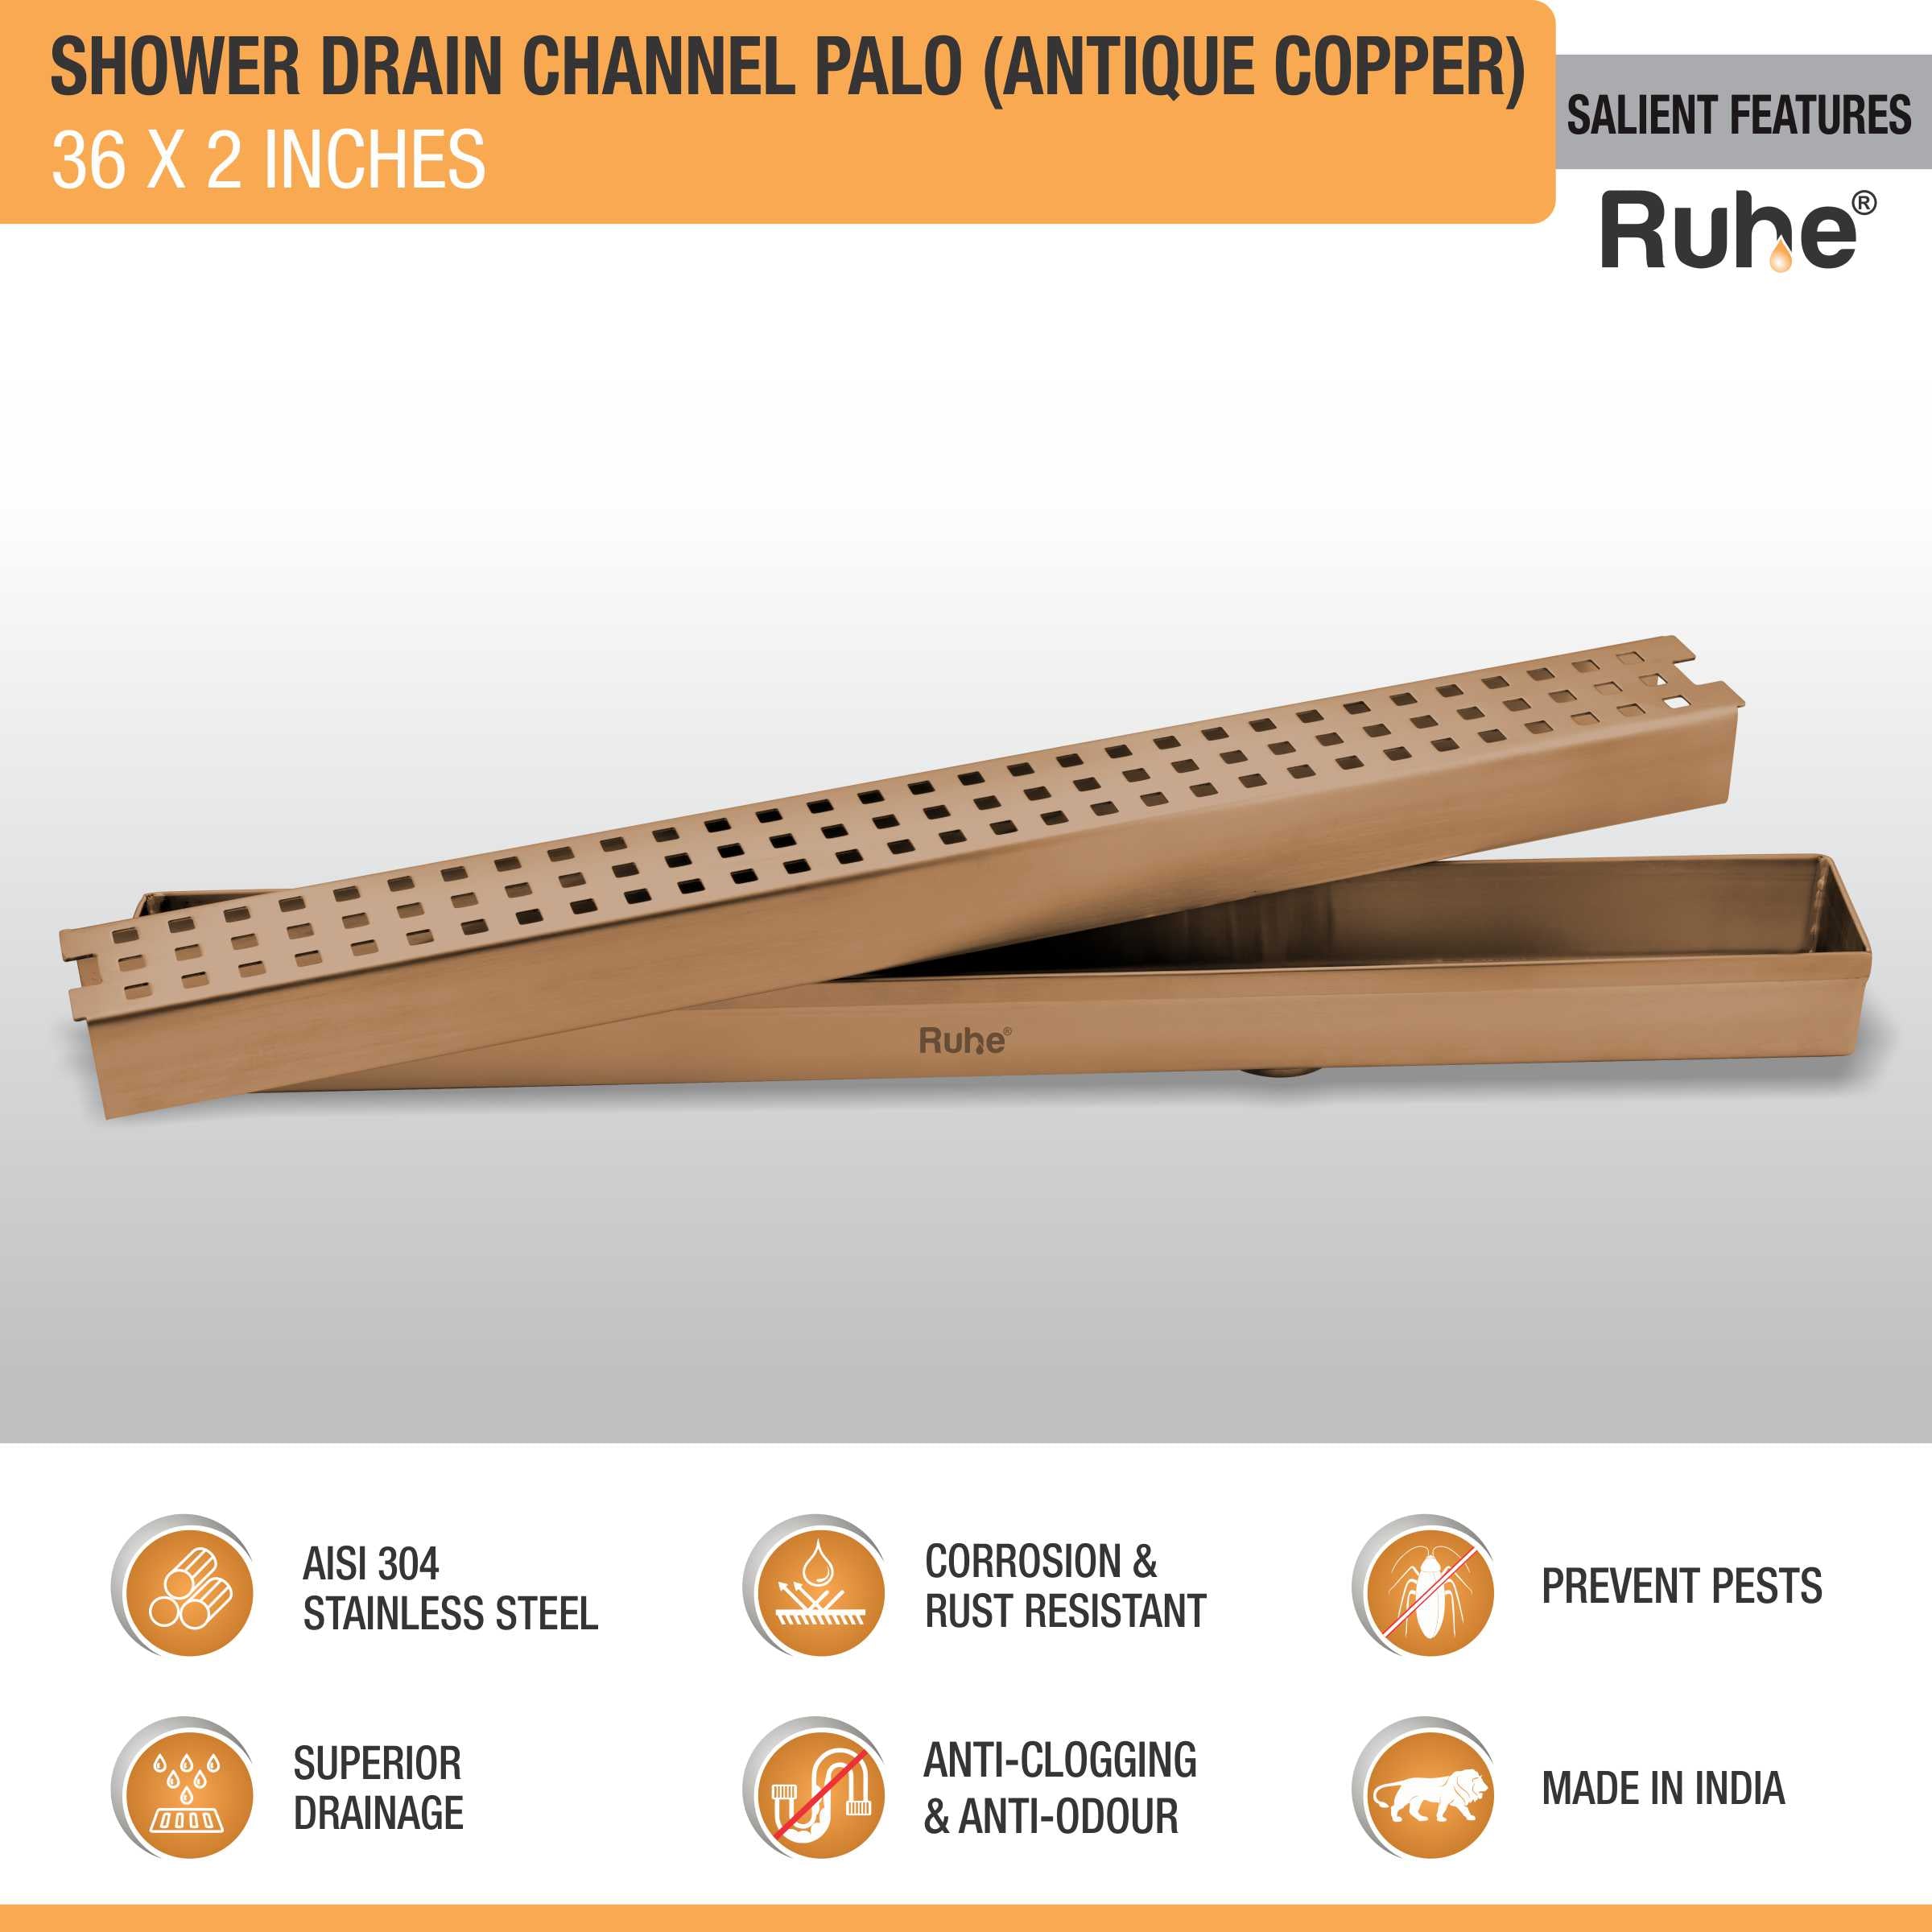 Palo Shower Drain Channel (36 x 2 Inches) ROSE GOLD/ANTIQUE COPPER features